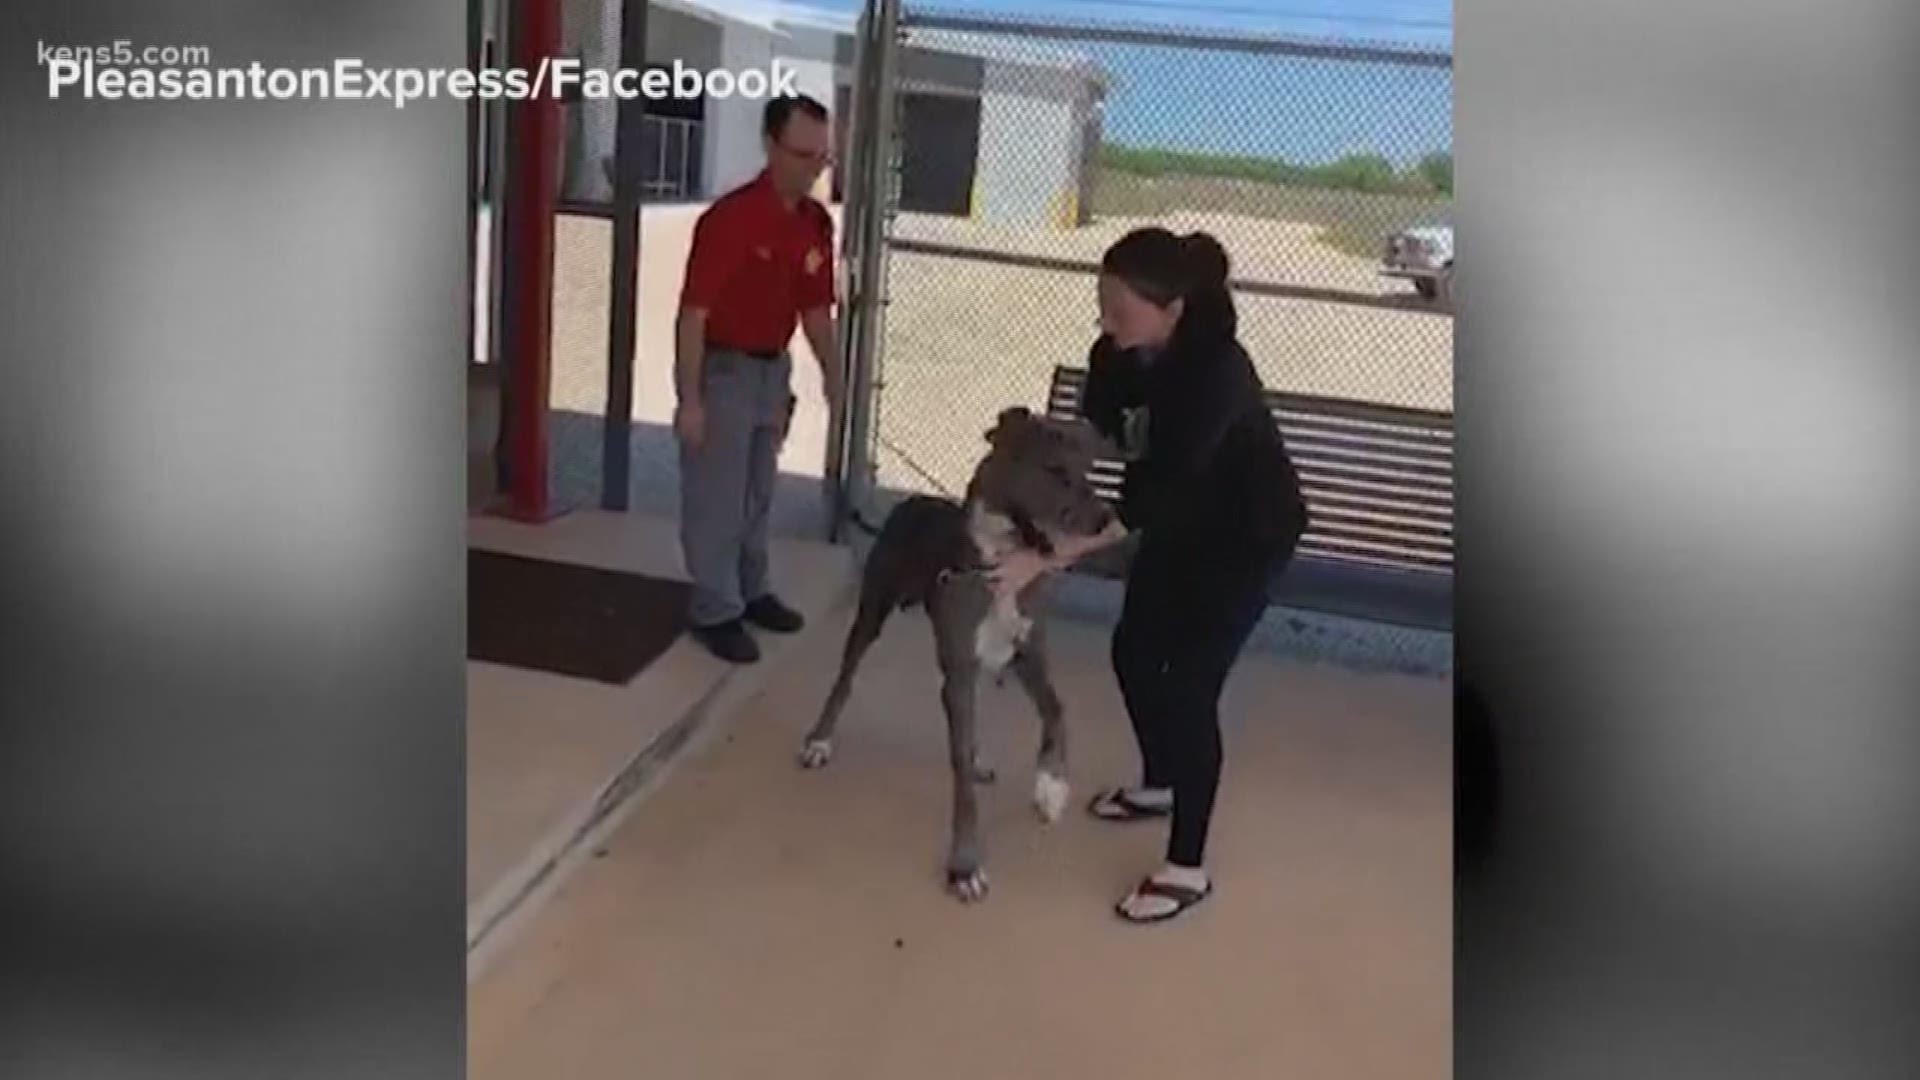 The Atascosa County Sheriff's Office and Animal Control department were able to track down Scooby, the Great Dane service animal that belongs to a disabled U.S. Coast Guard veteran. The dog went missing two weeks ago.